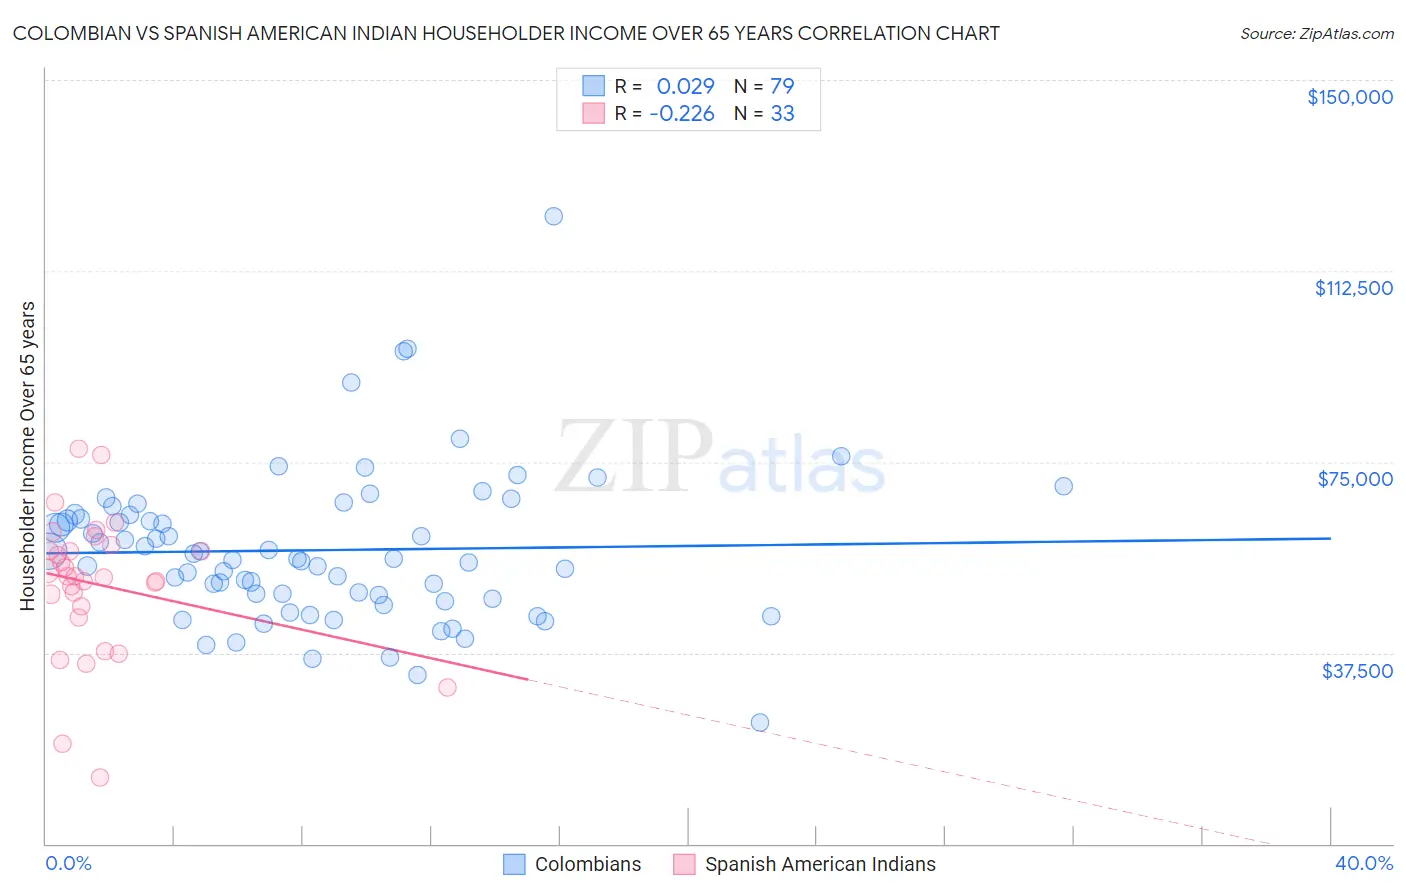 Colombian vs Spanish American Indian Householder Income Over 65 years